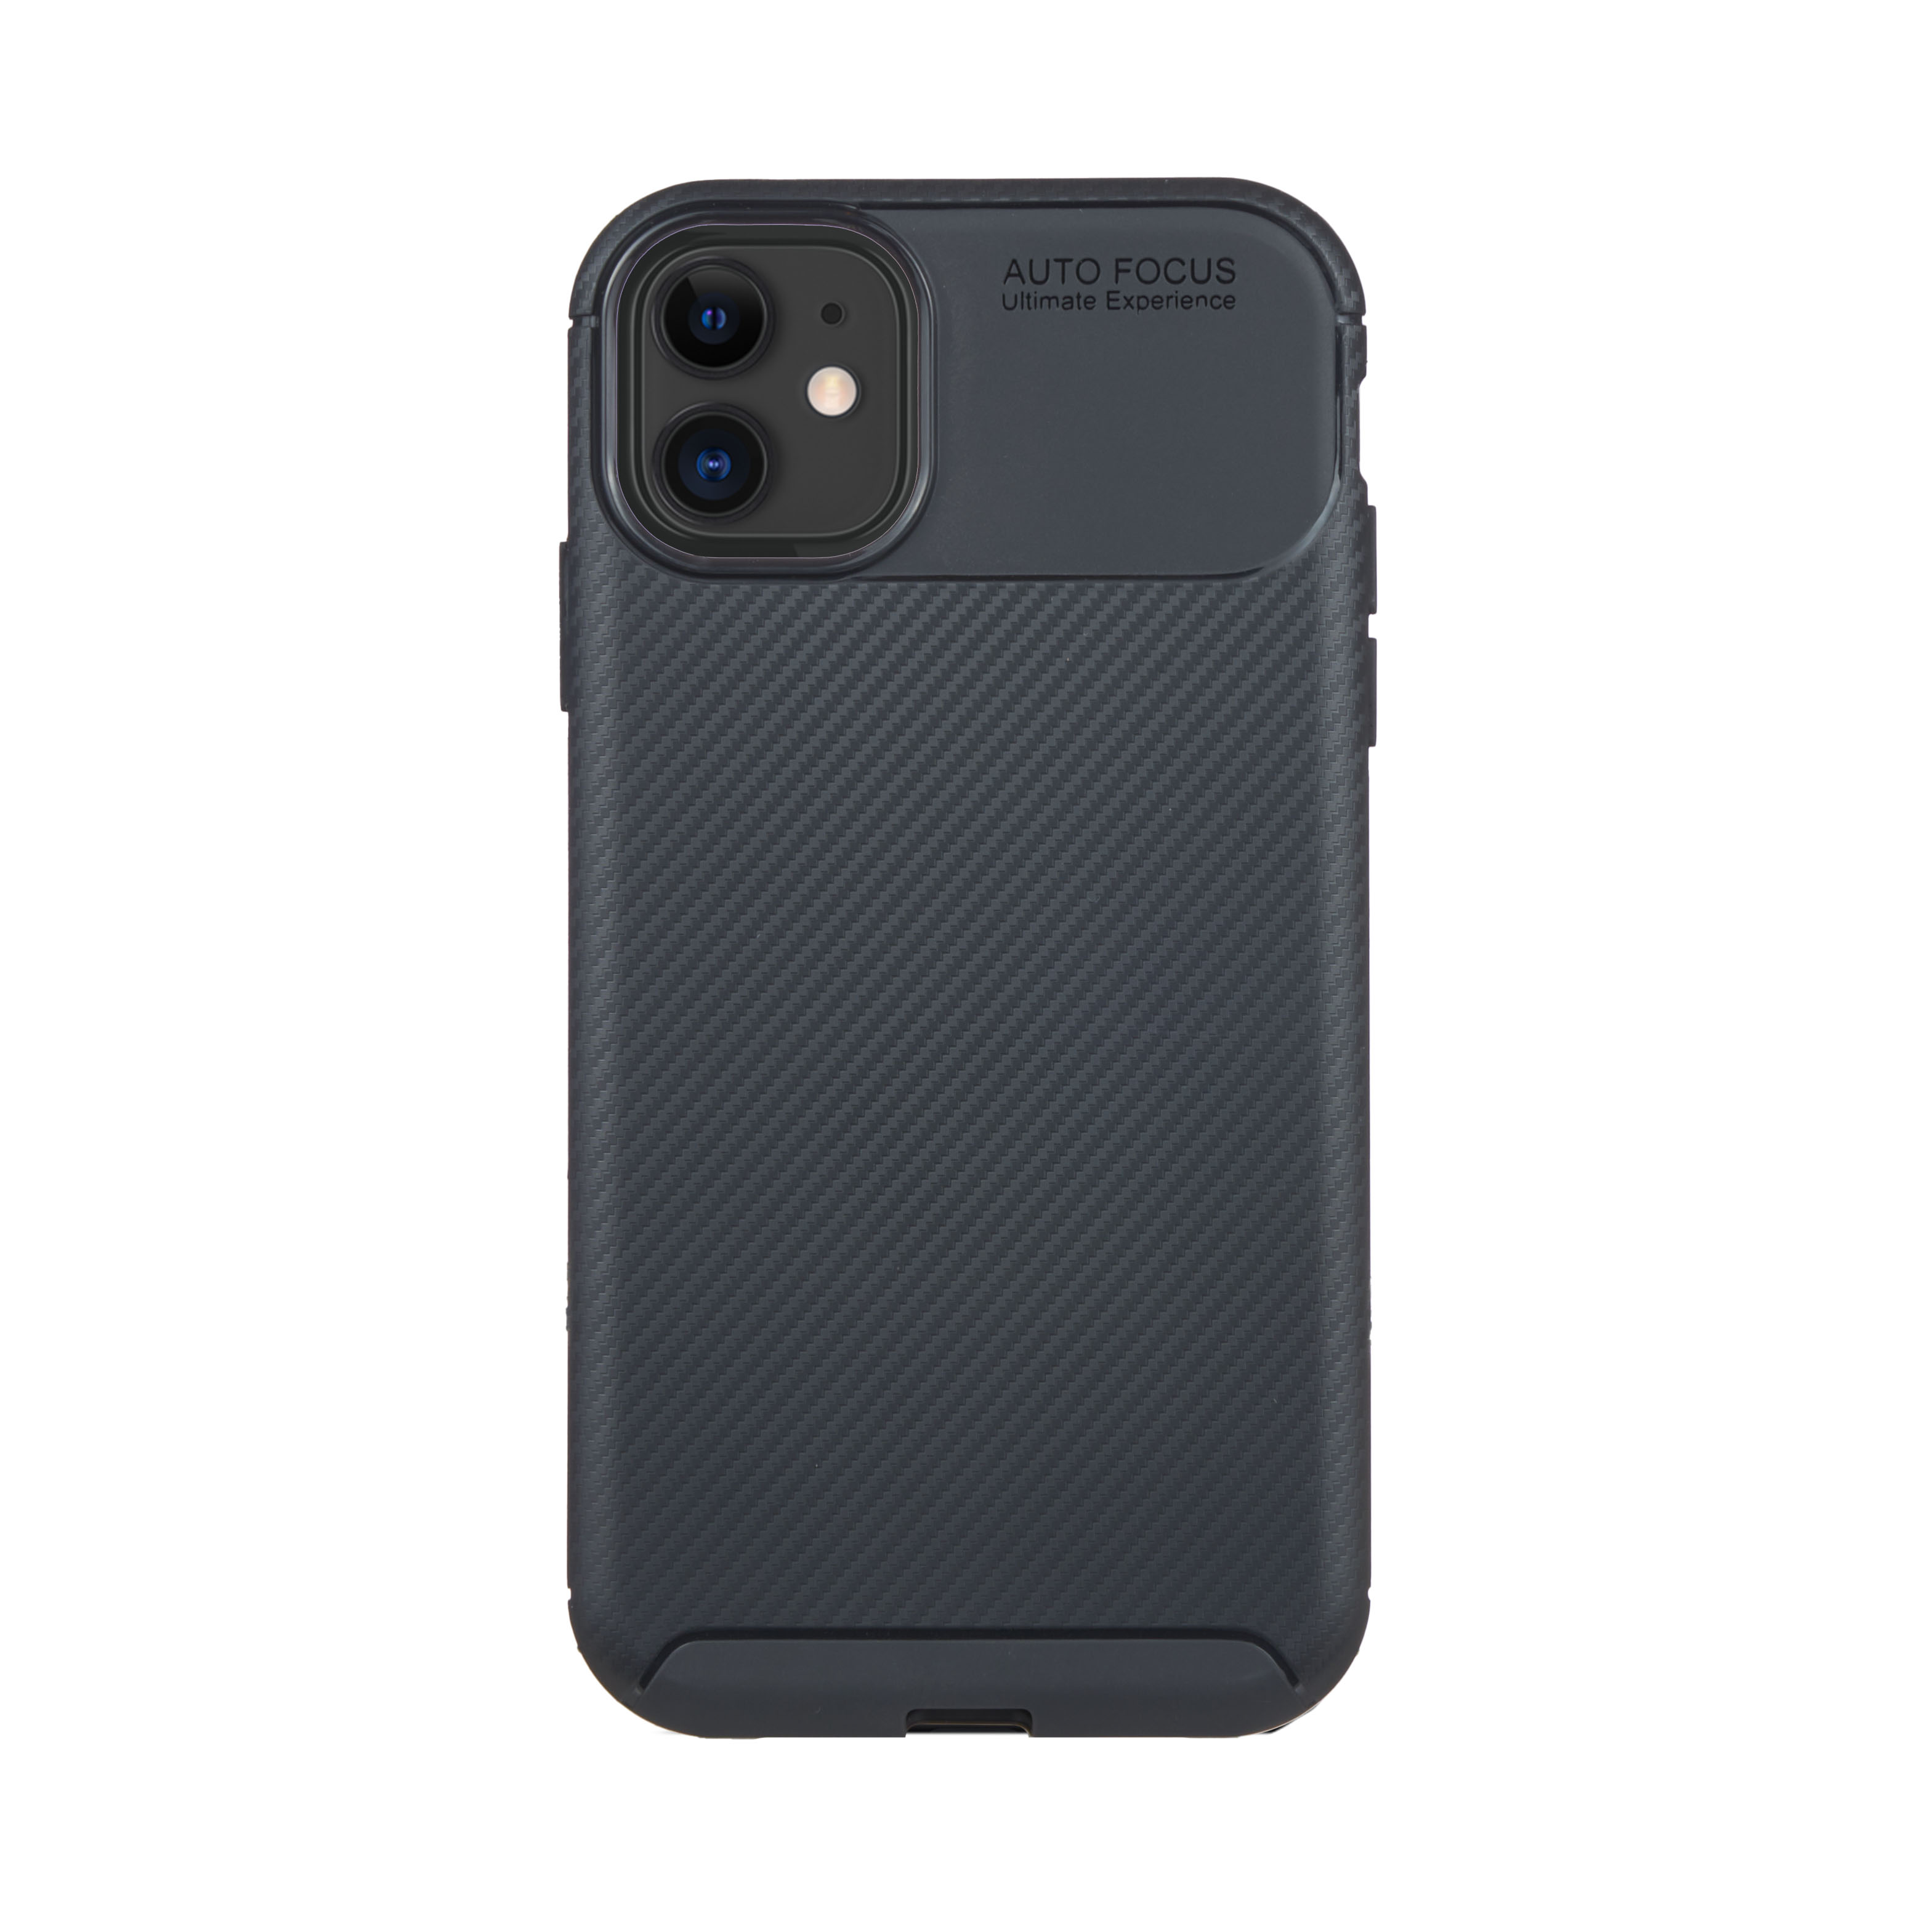 Tpu carbon new for iphone 11 (6.1") black